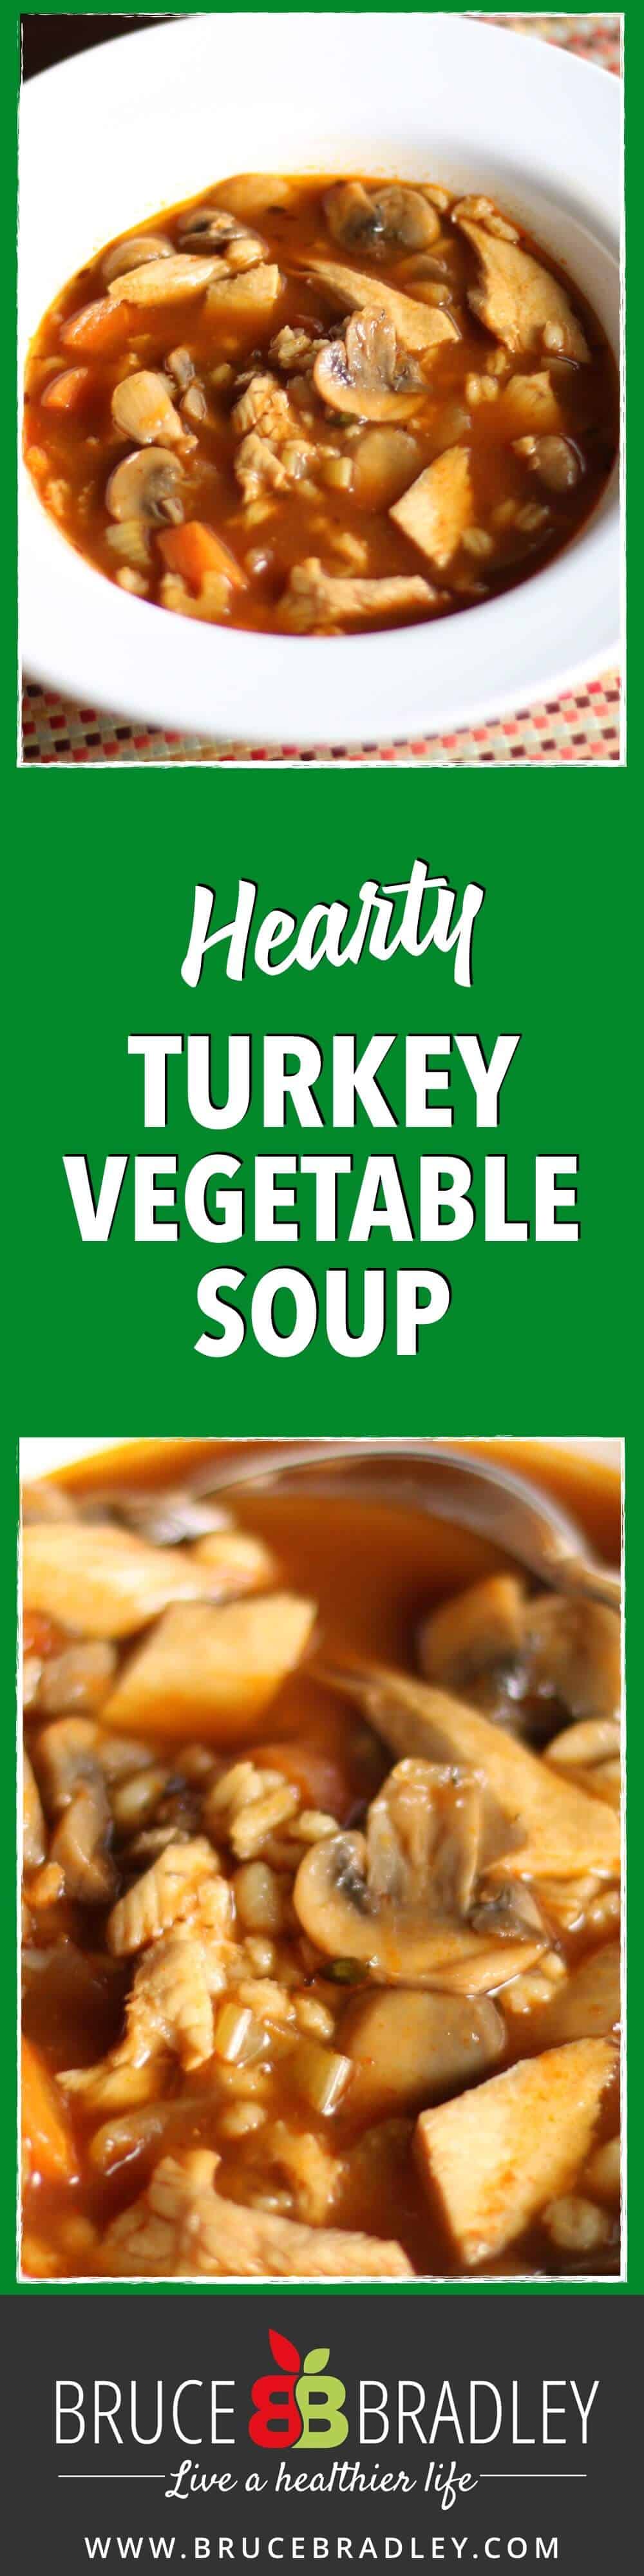 Turkey Vegetable Soup Is A Great Dish To Make After Thanksgiving, Or Substitute Chicken And Other Vegetables For A Soup You Can Make Anytime Of The Year!